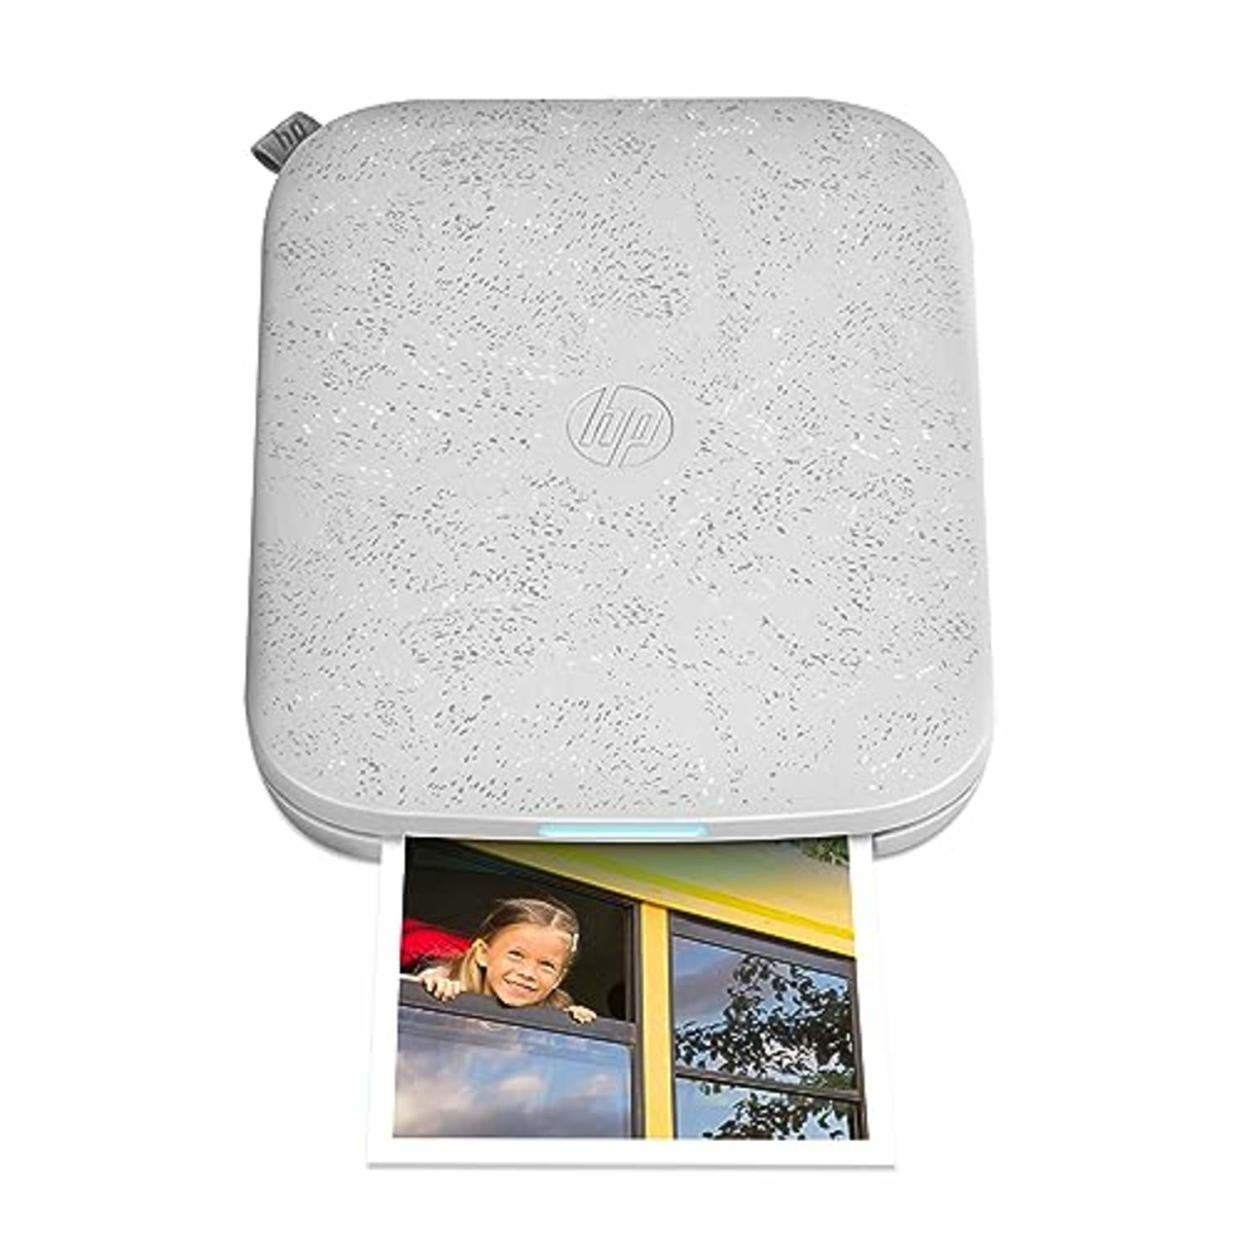 HP Sprocket 3x4 Instant Photo Printer – Wirelessly Print 3.5x4.25” Photos on Zink Paper from iOS & Android Devices, White (AMAZON)